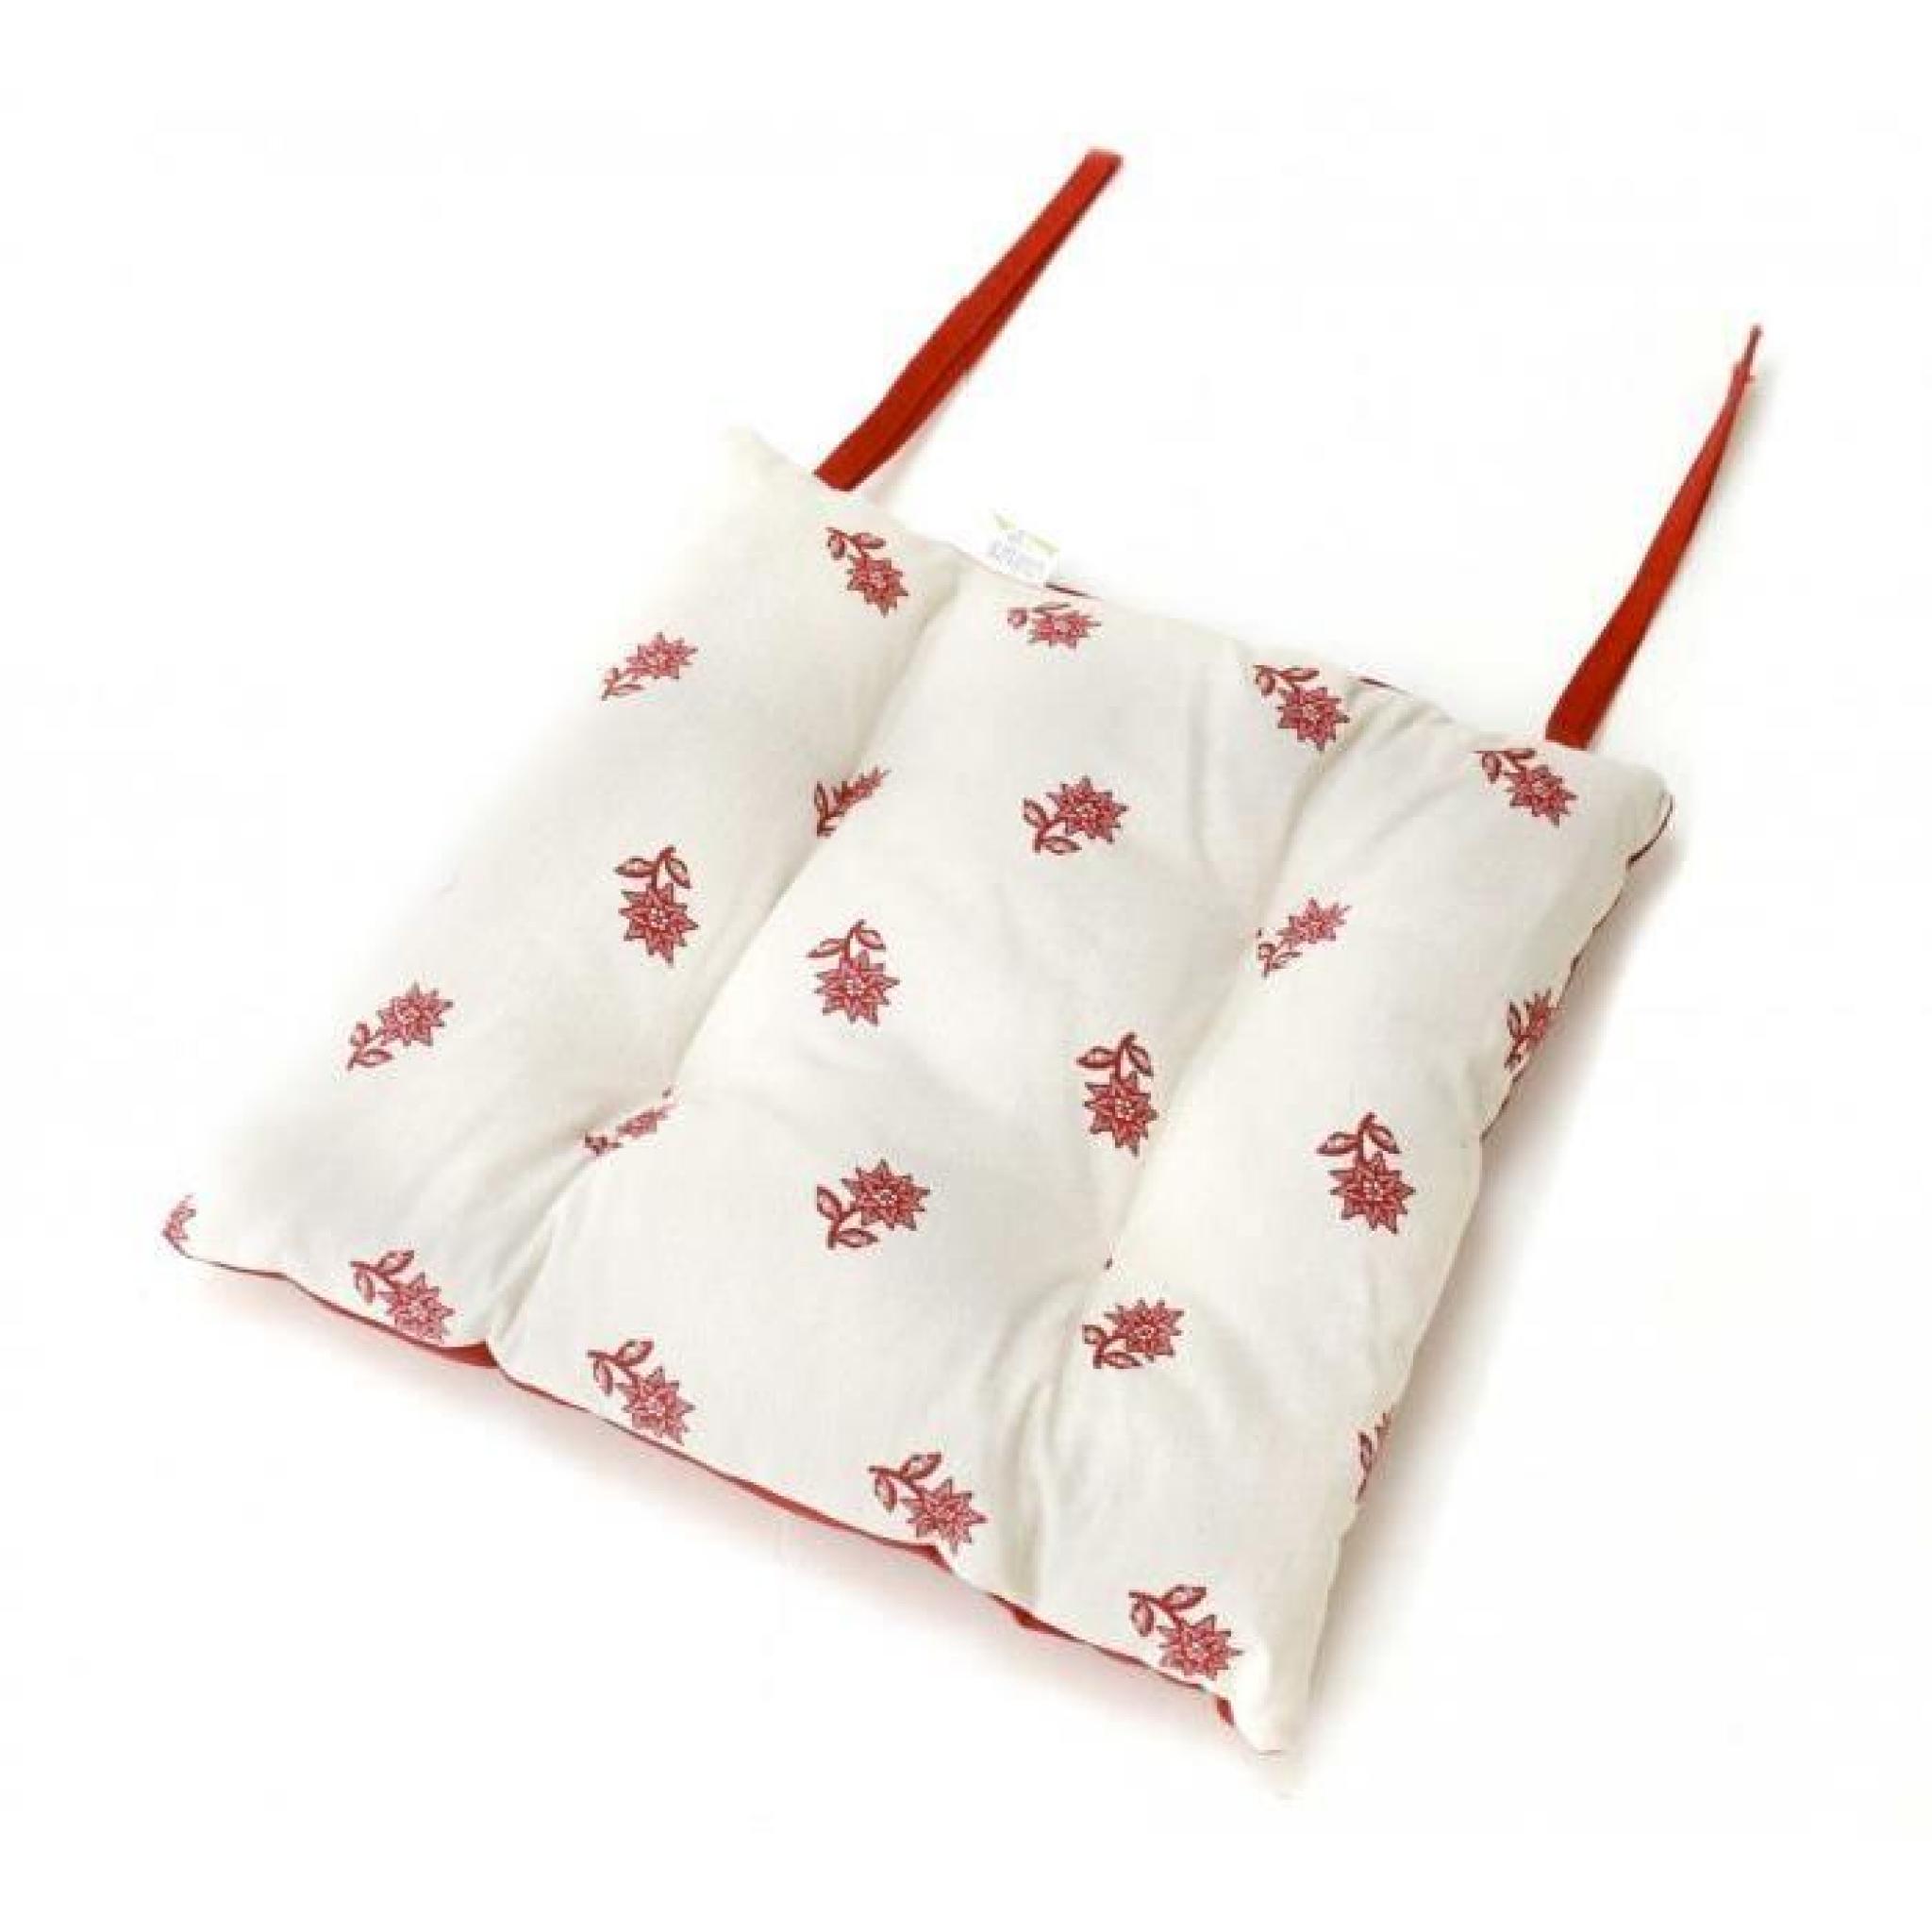 Galette de chaise style montagne Edelweiss blanc rouge Aspin